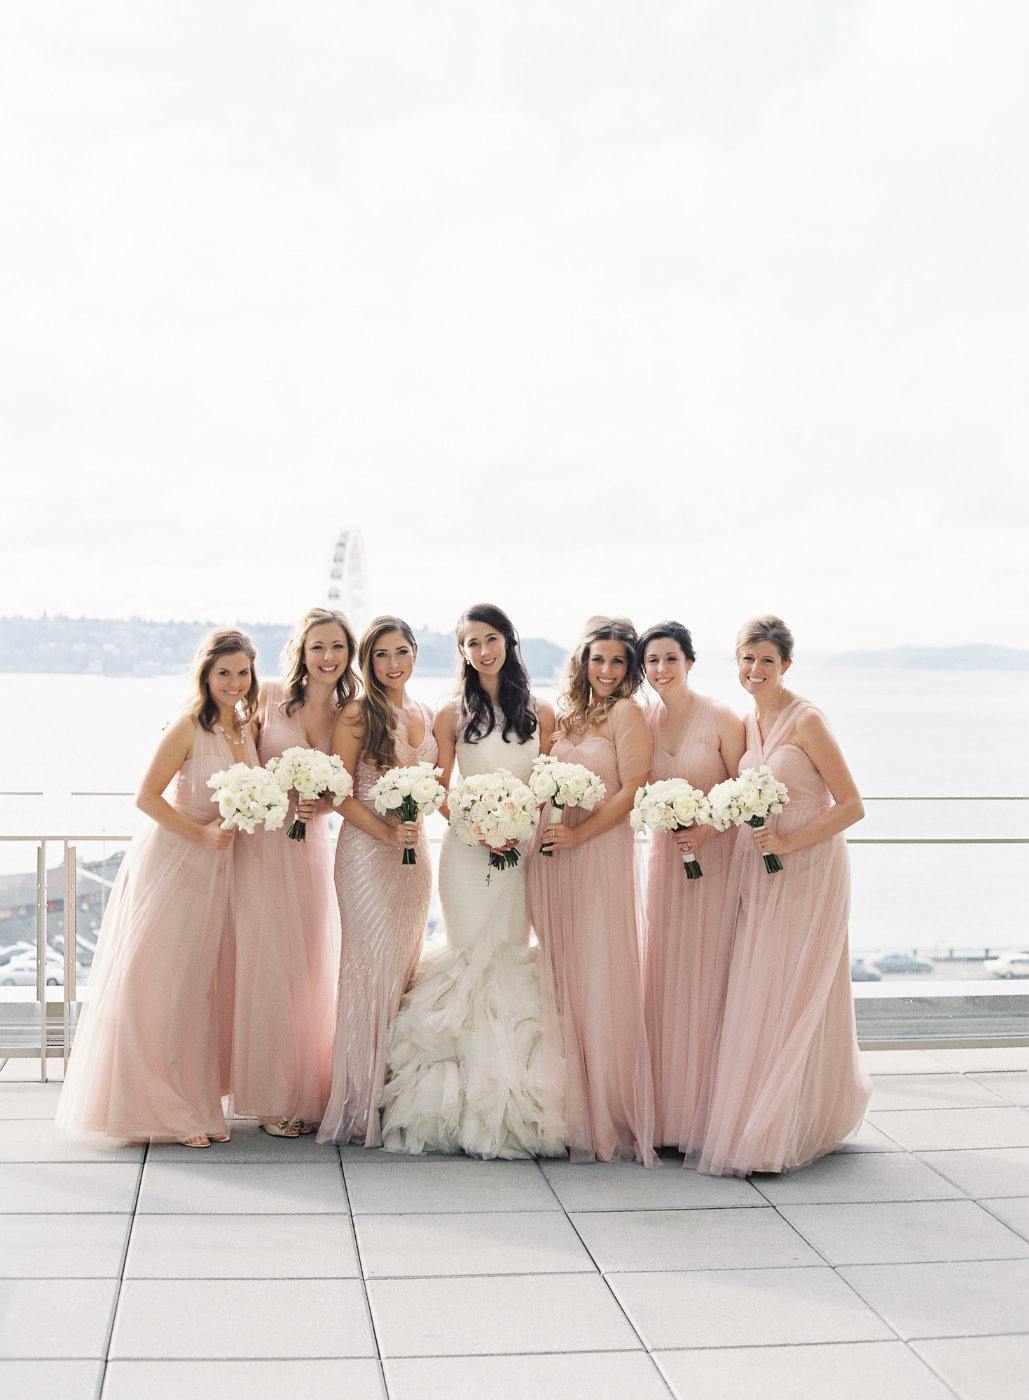 Bridal party in blush dresses with white rose bouquets.